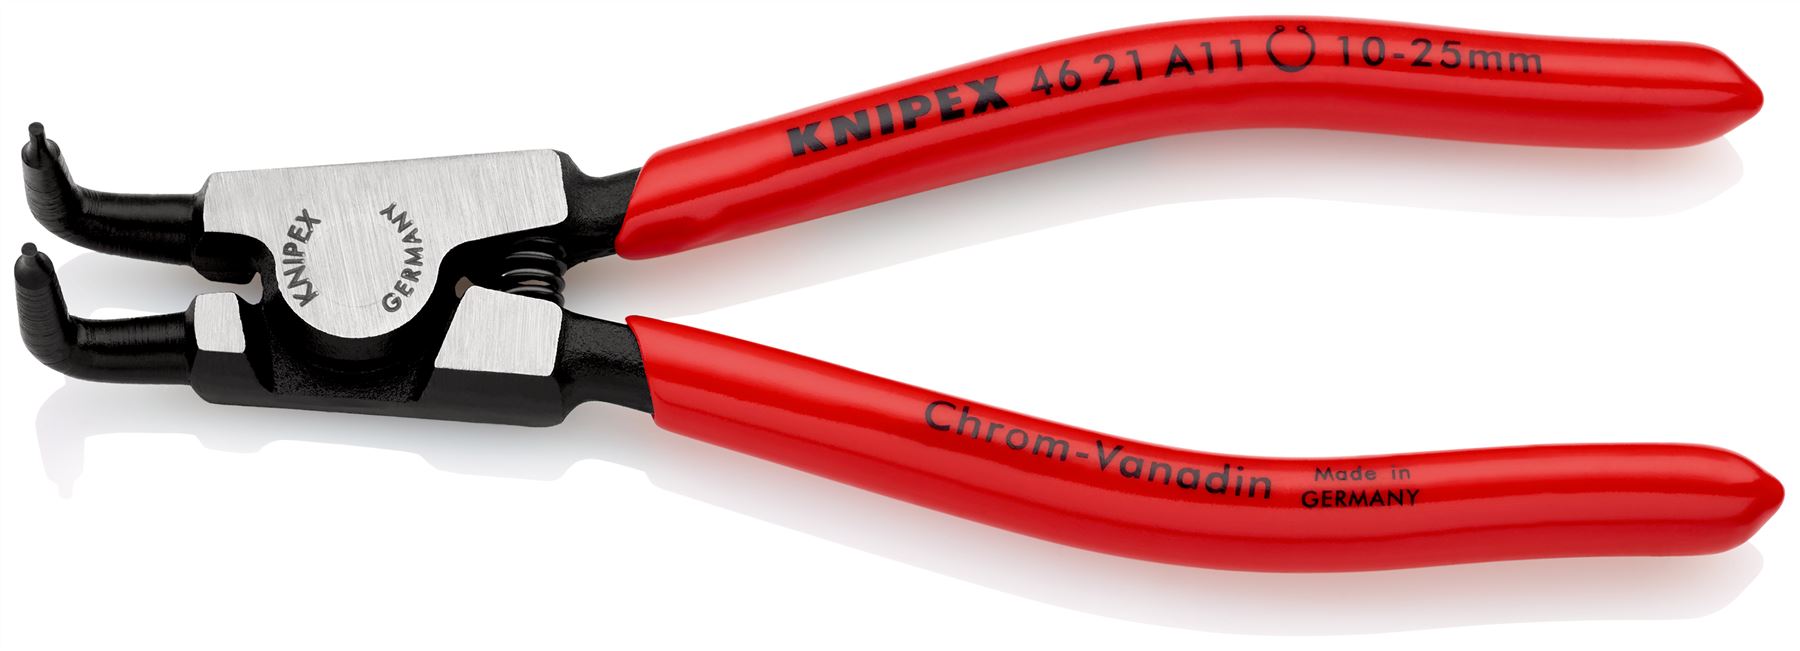 KNIPEX Circlip Pliers for External Circlips on Shafts 90° Angled 125mm 1.3mm Diameter Tips 46 21 A11 SB